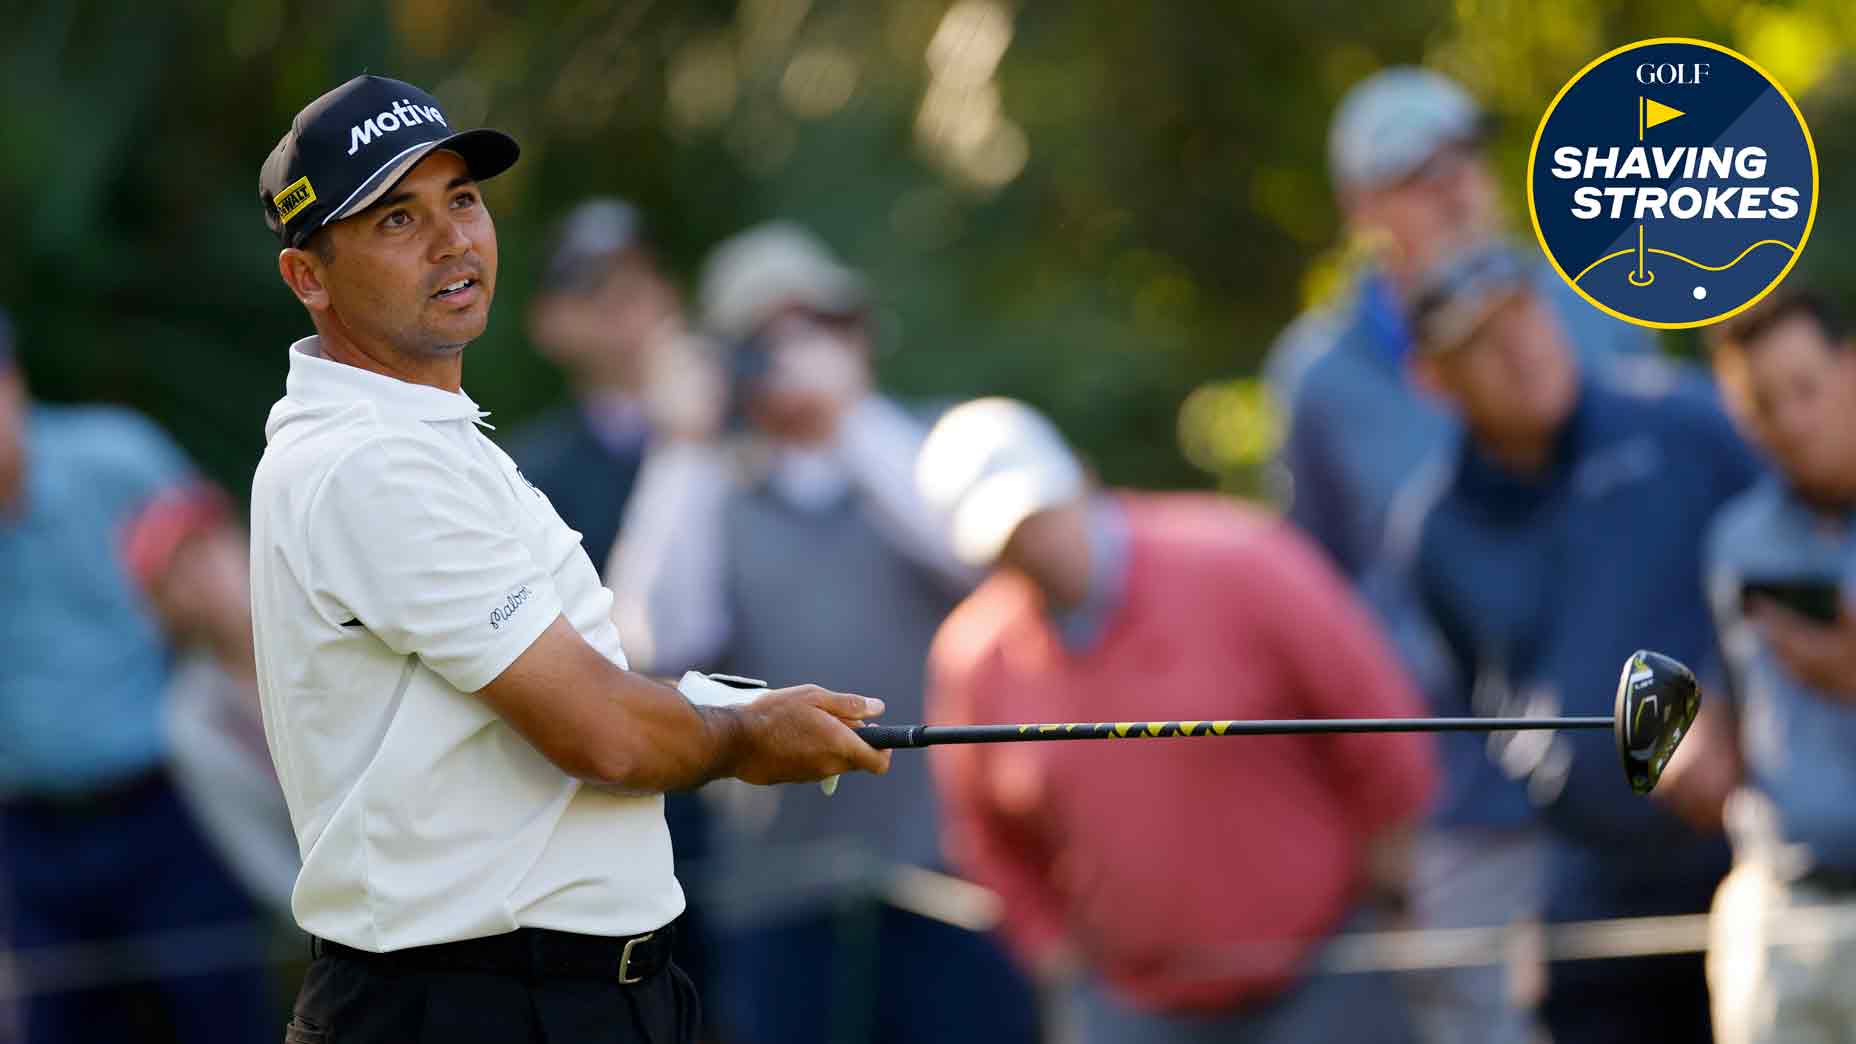 According to Jason Day's mental coach, these are the things every golfer needs to remember when trying to overcome a mid-round slump